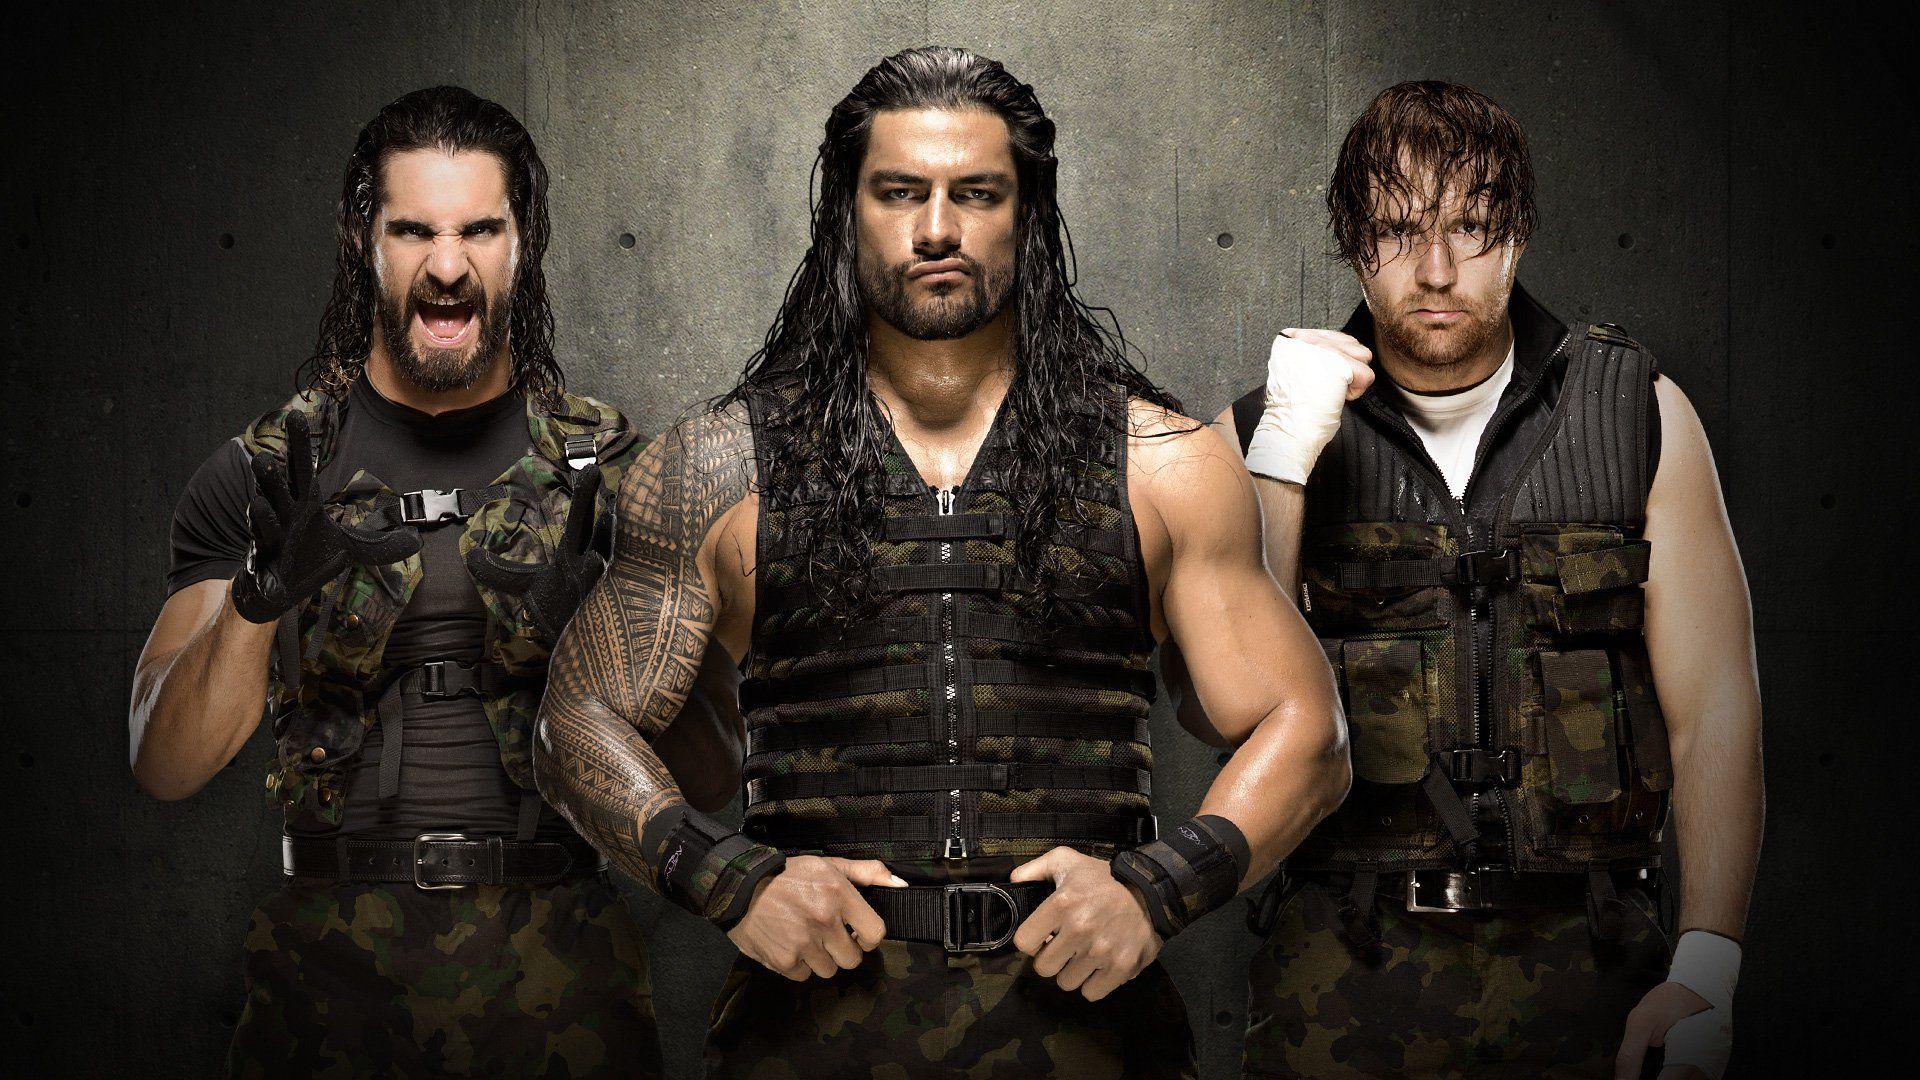 The Shield WWE Wallpaper 2017. The Shield Wwe 2017 Picture to Pin